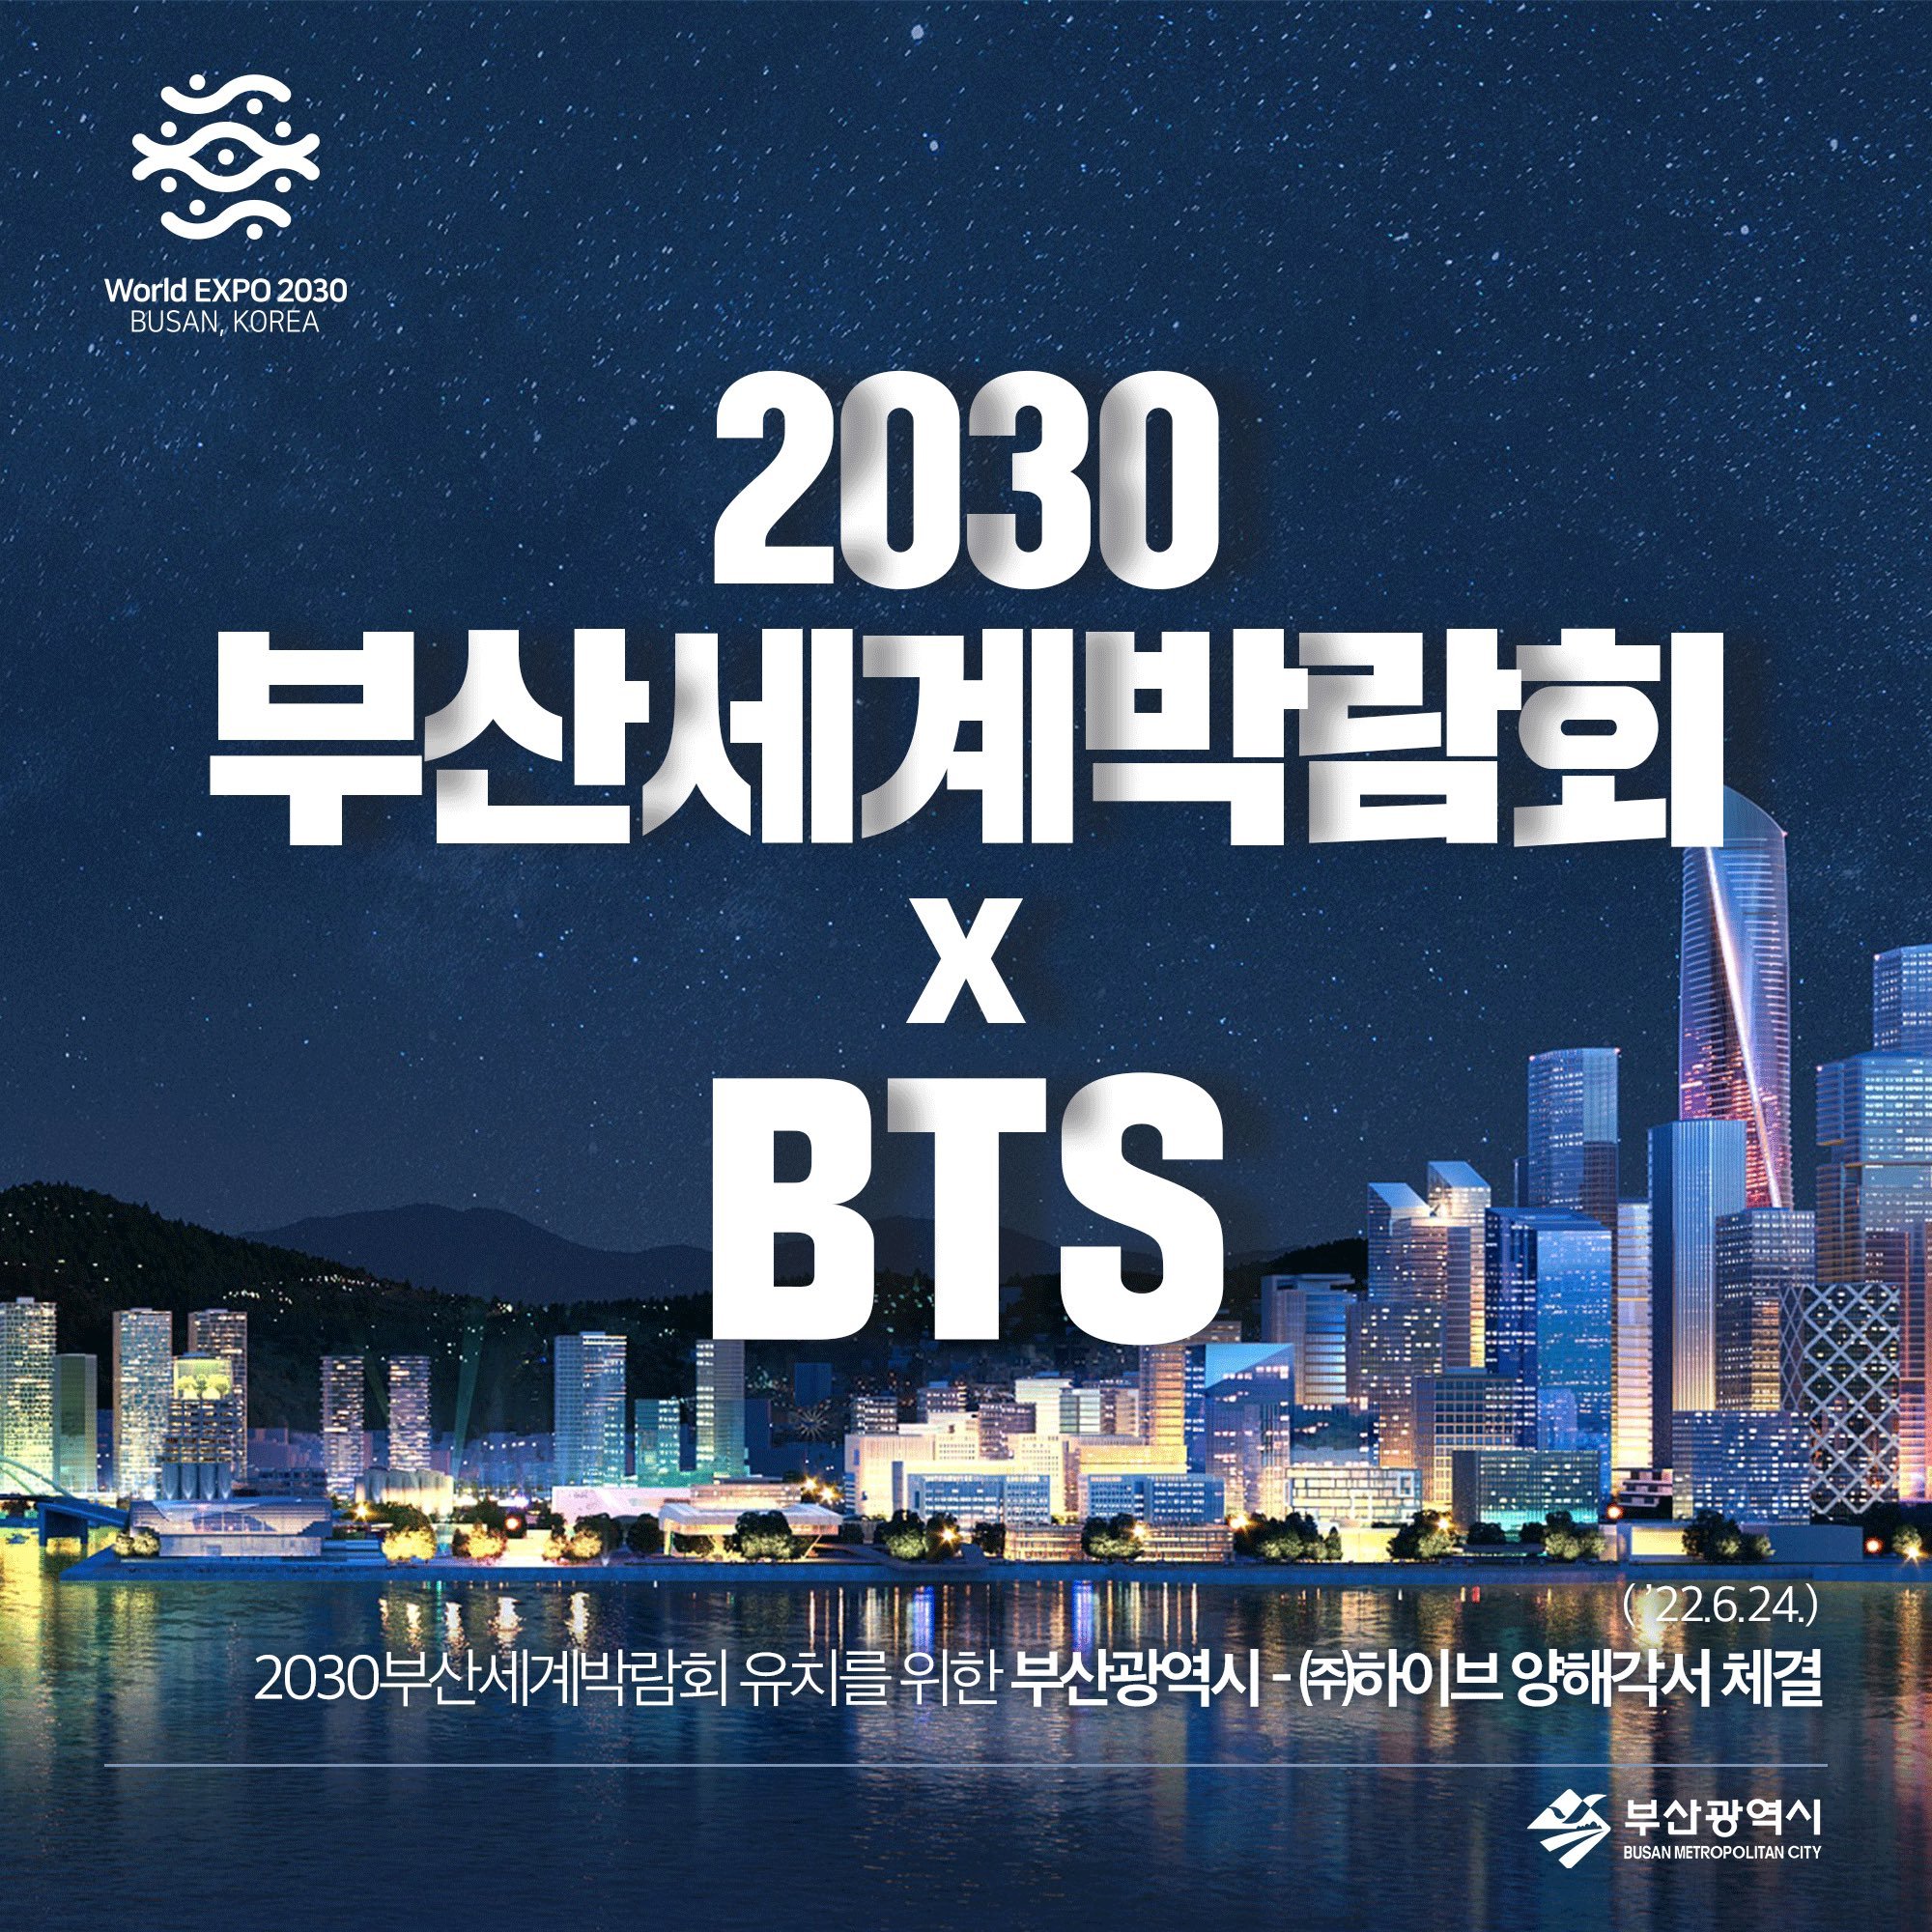 BTS Officially Appointed as Ambassadors for World Expo 2030 Busan